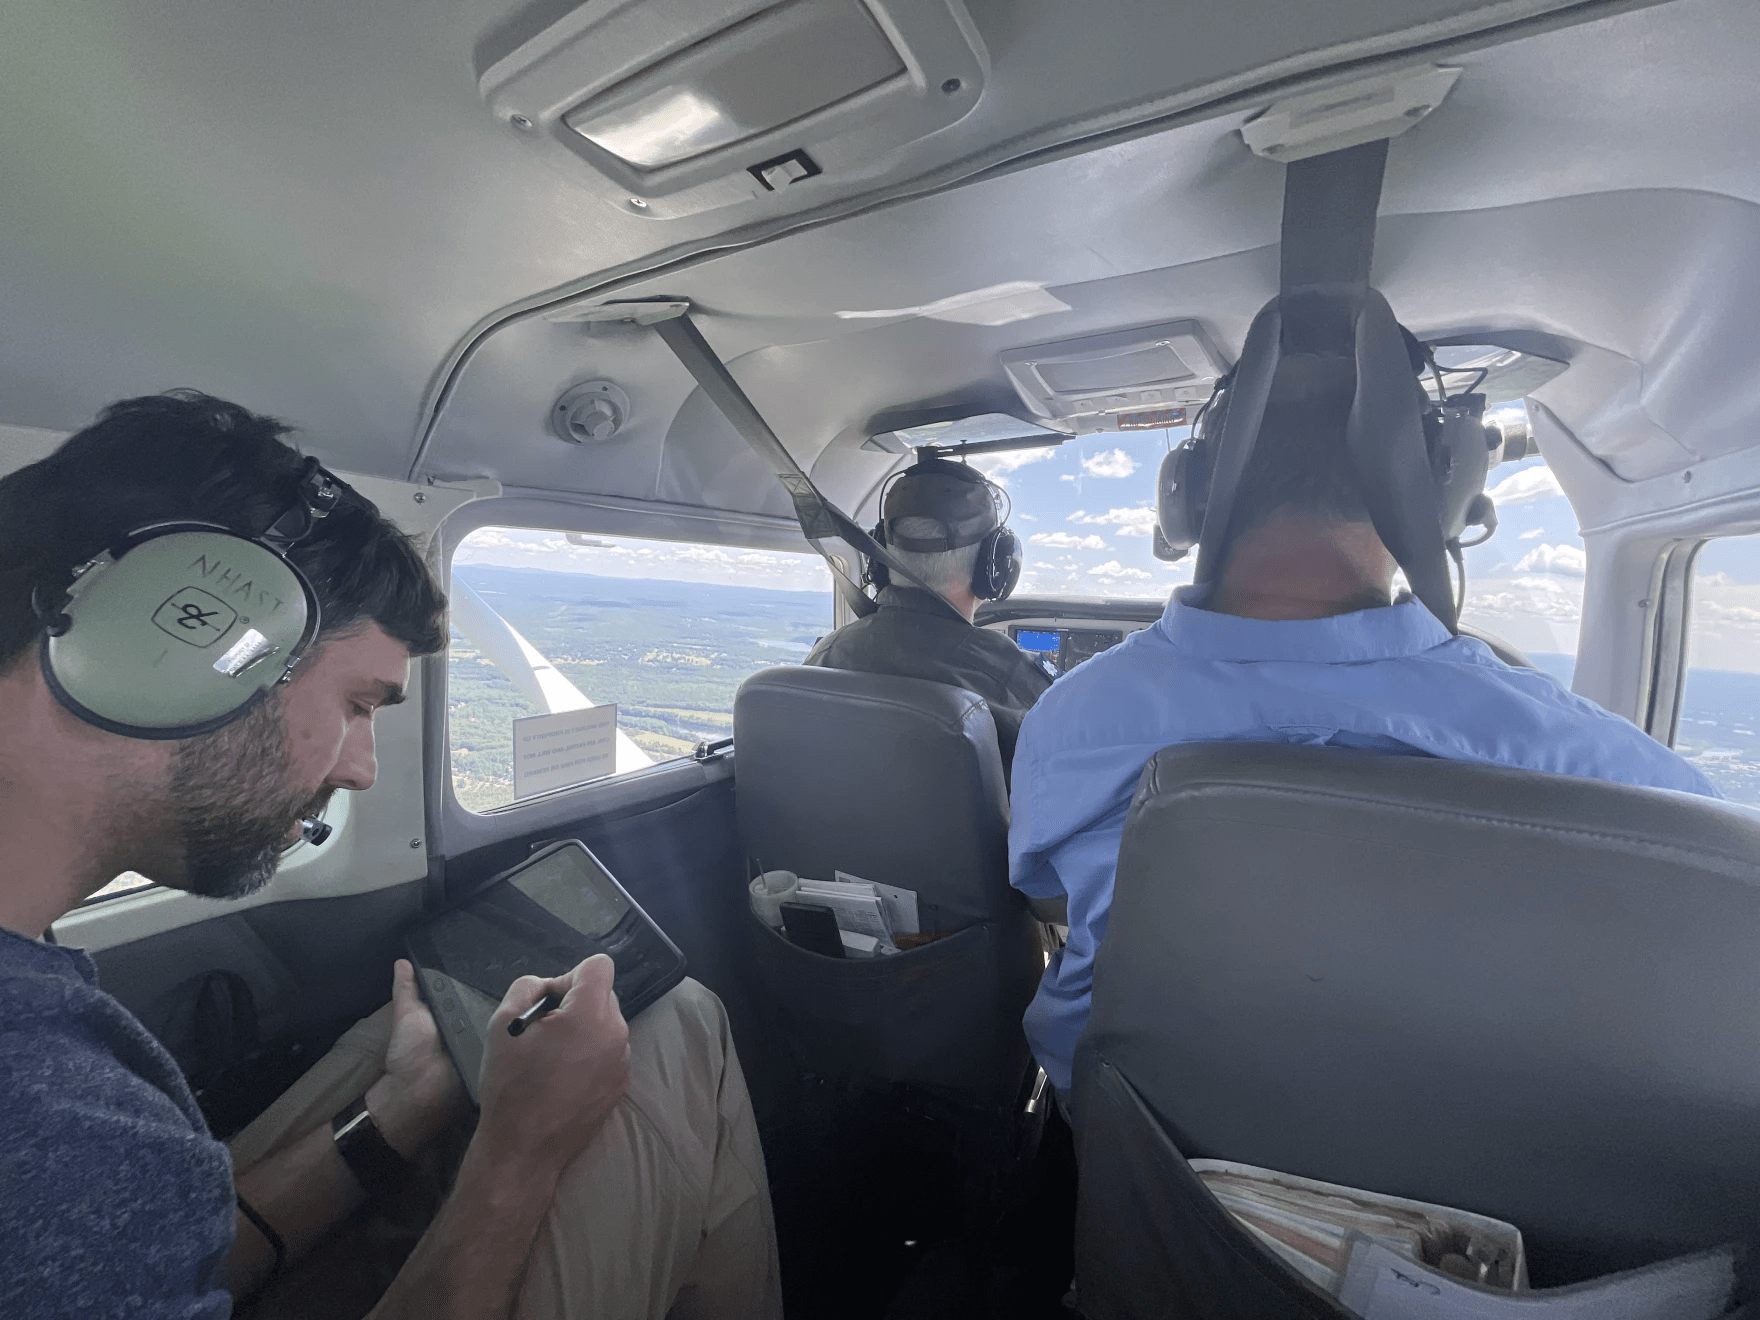 Davidson and Lombard record the shape of the damage they see from the airplane on digital tablets. (Mara Hoplamazian/NHPR)